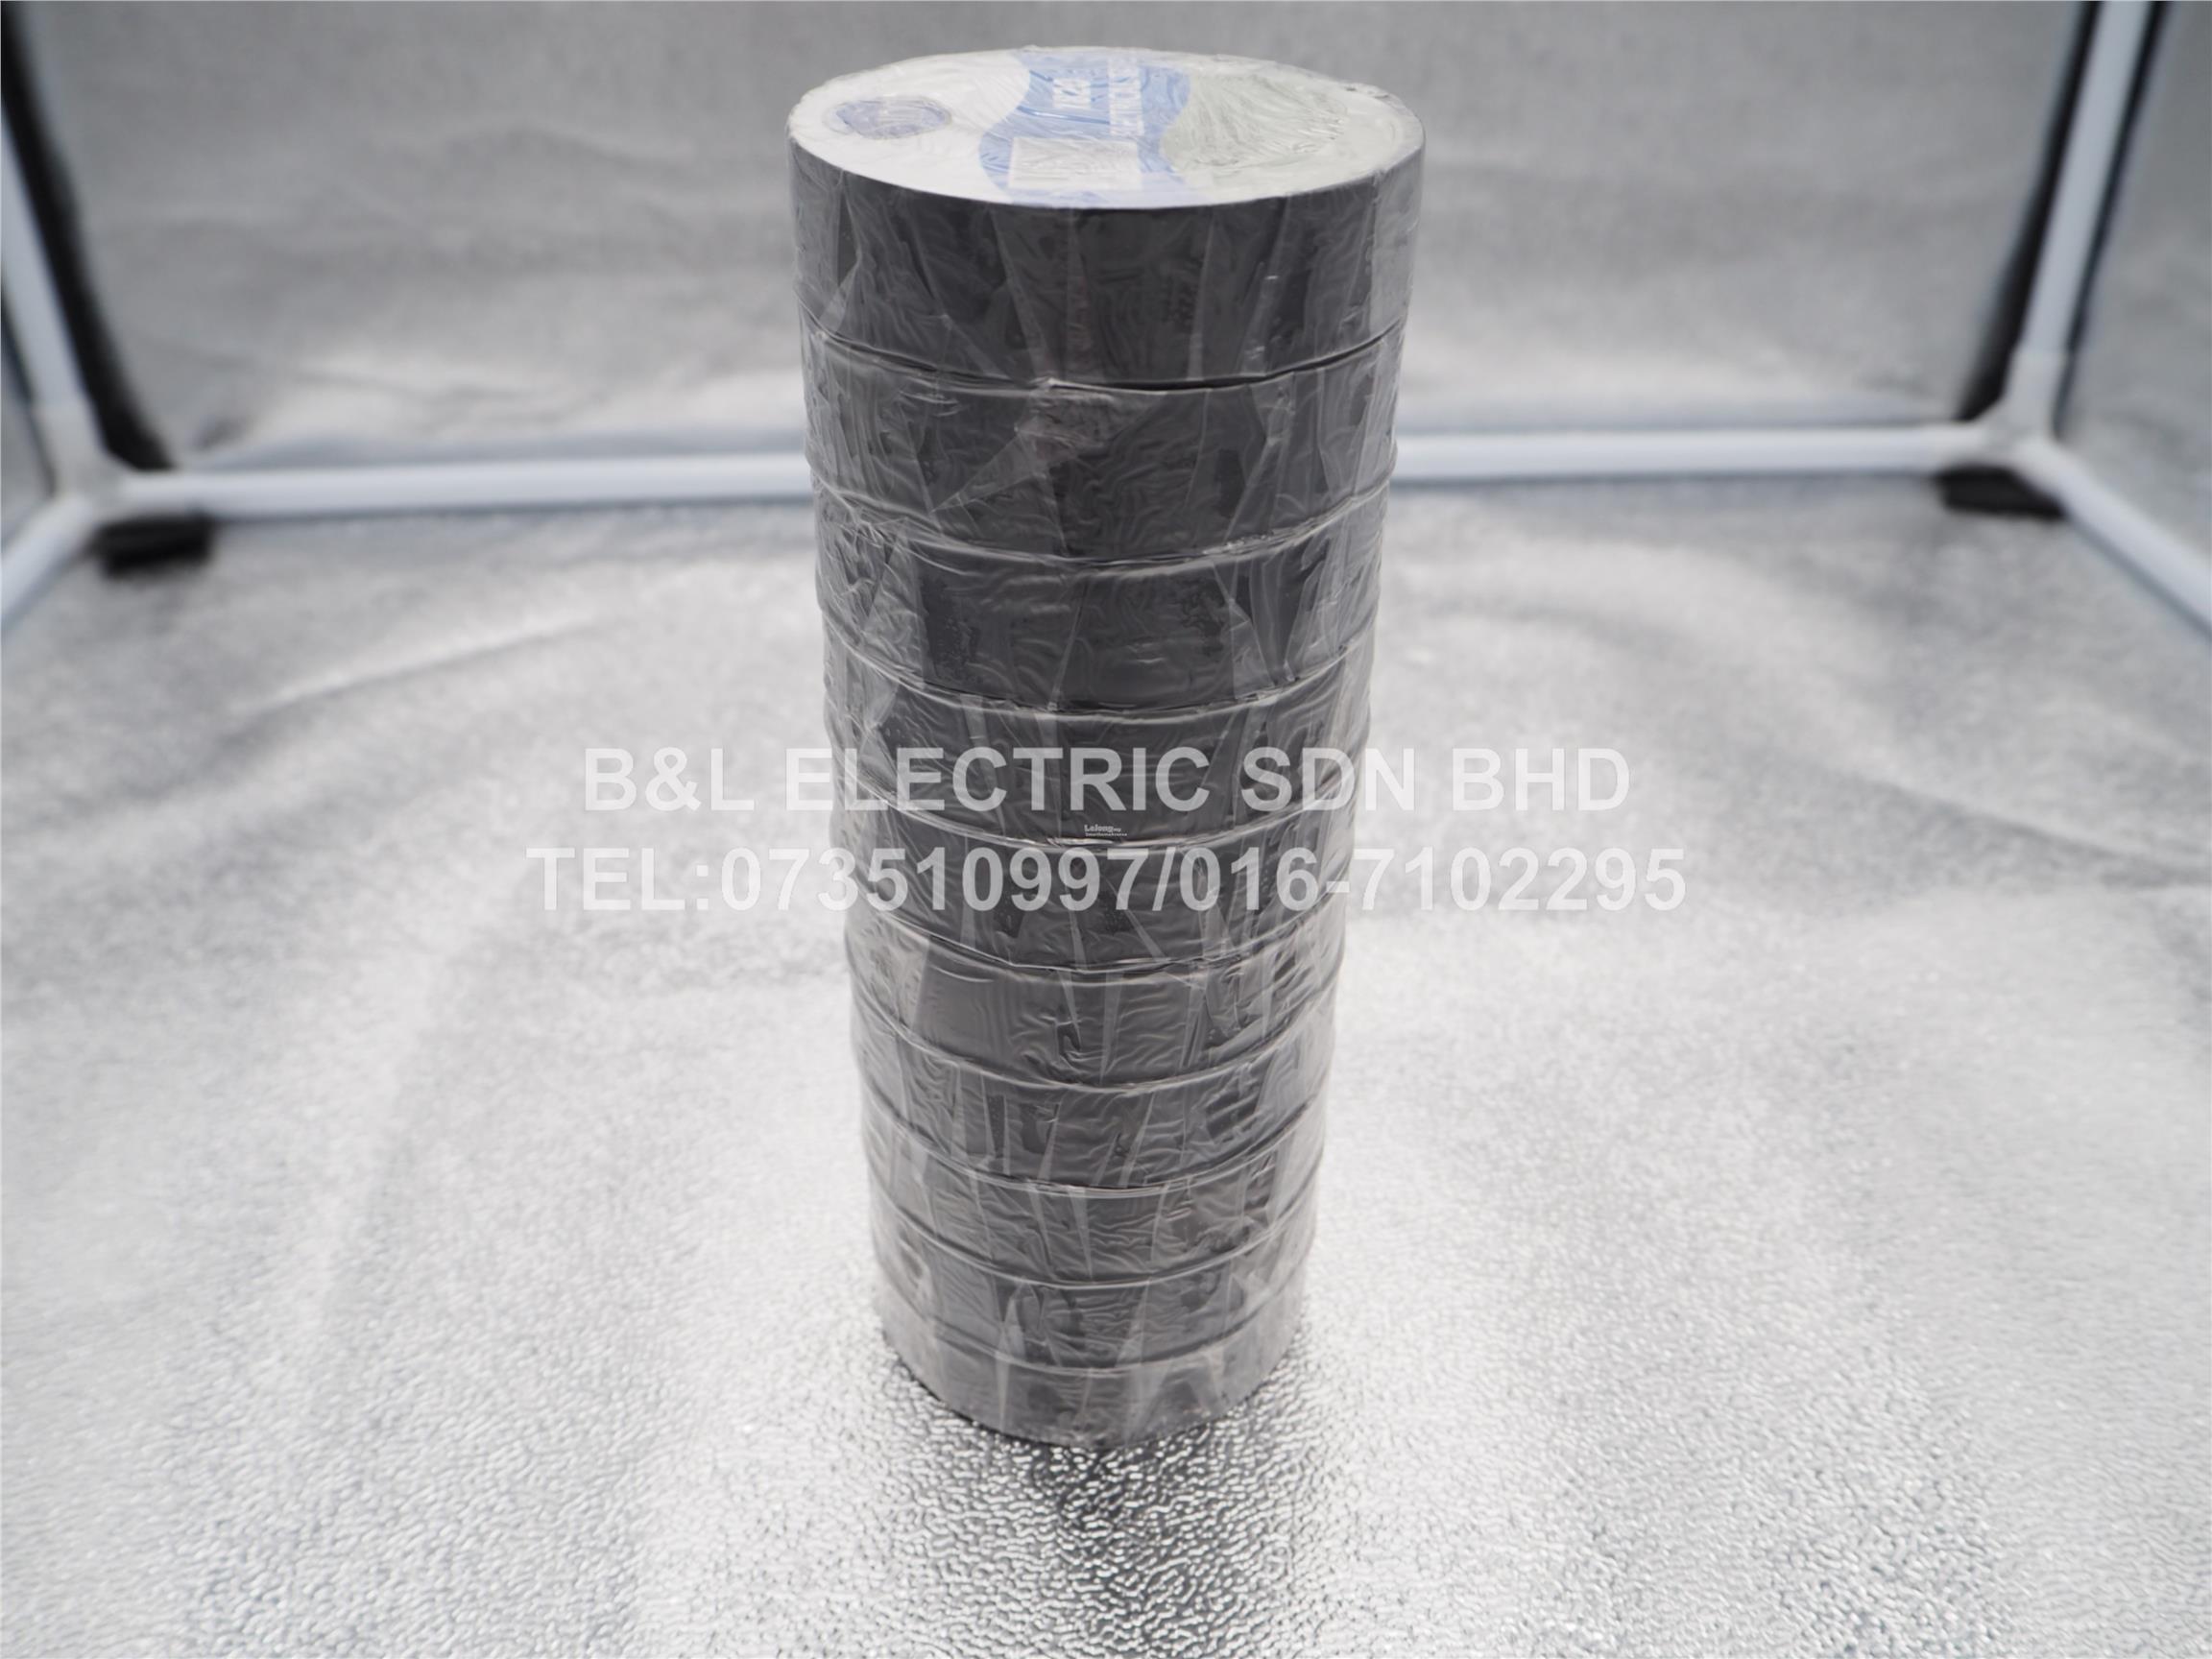 SINO ELECTRICAL CABLE TAPE (BIG)